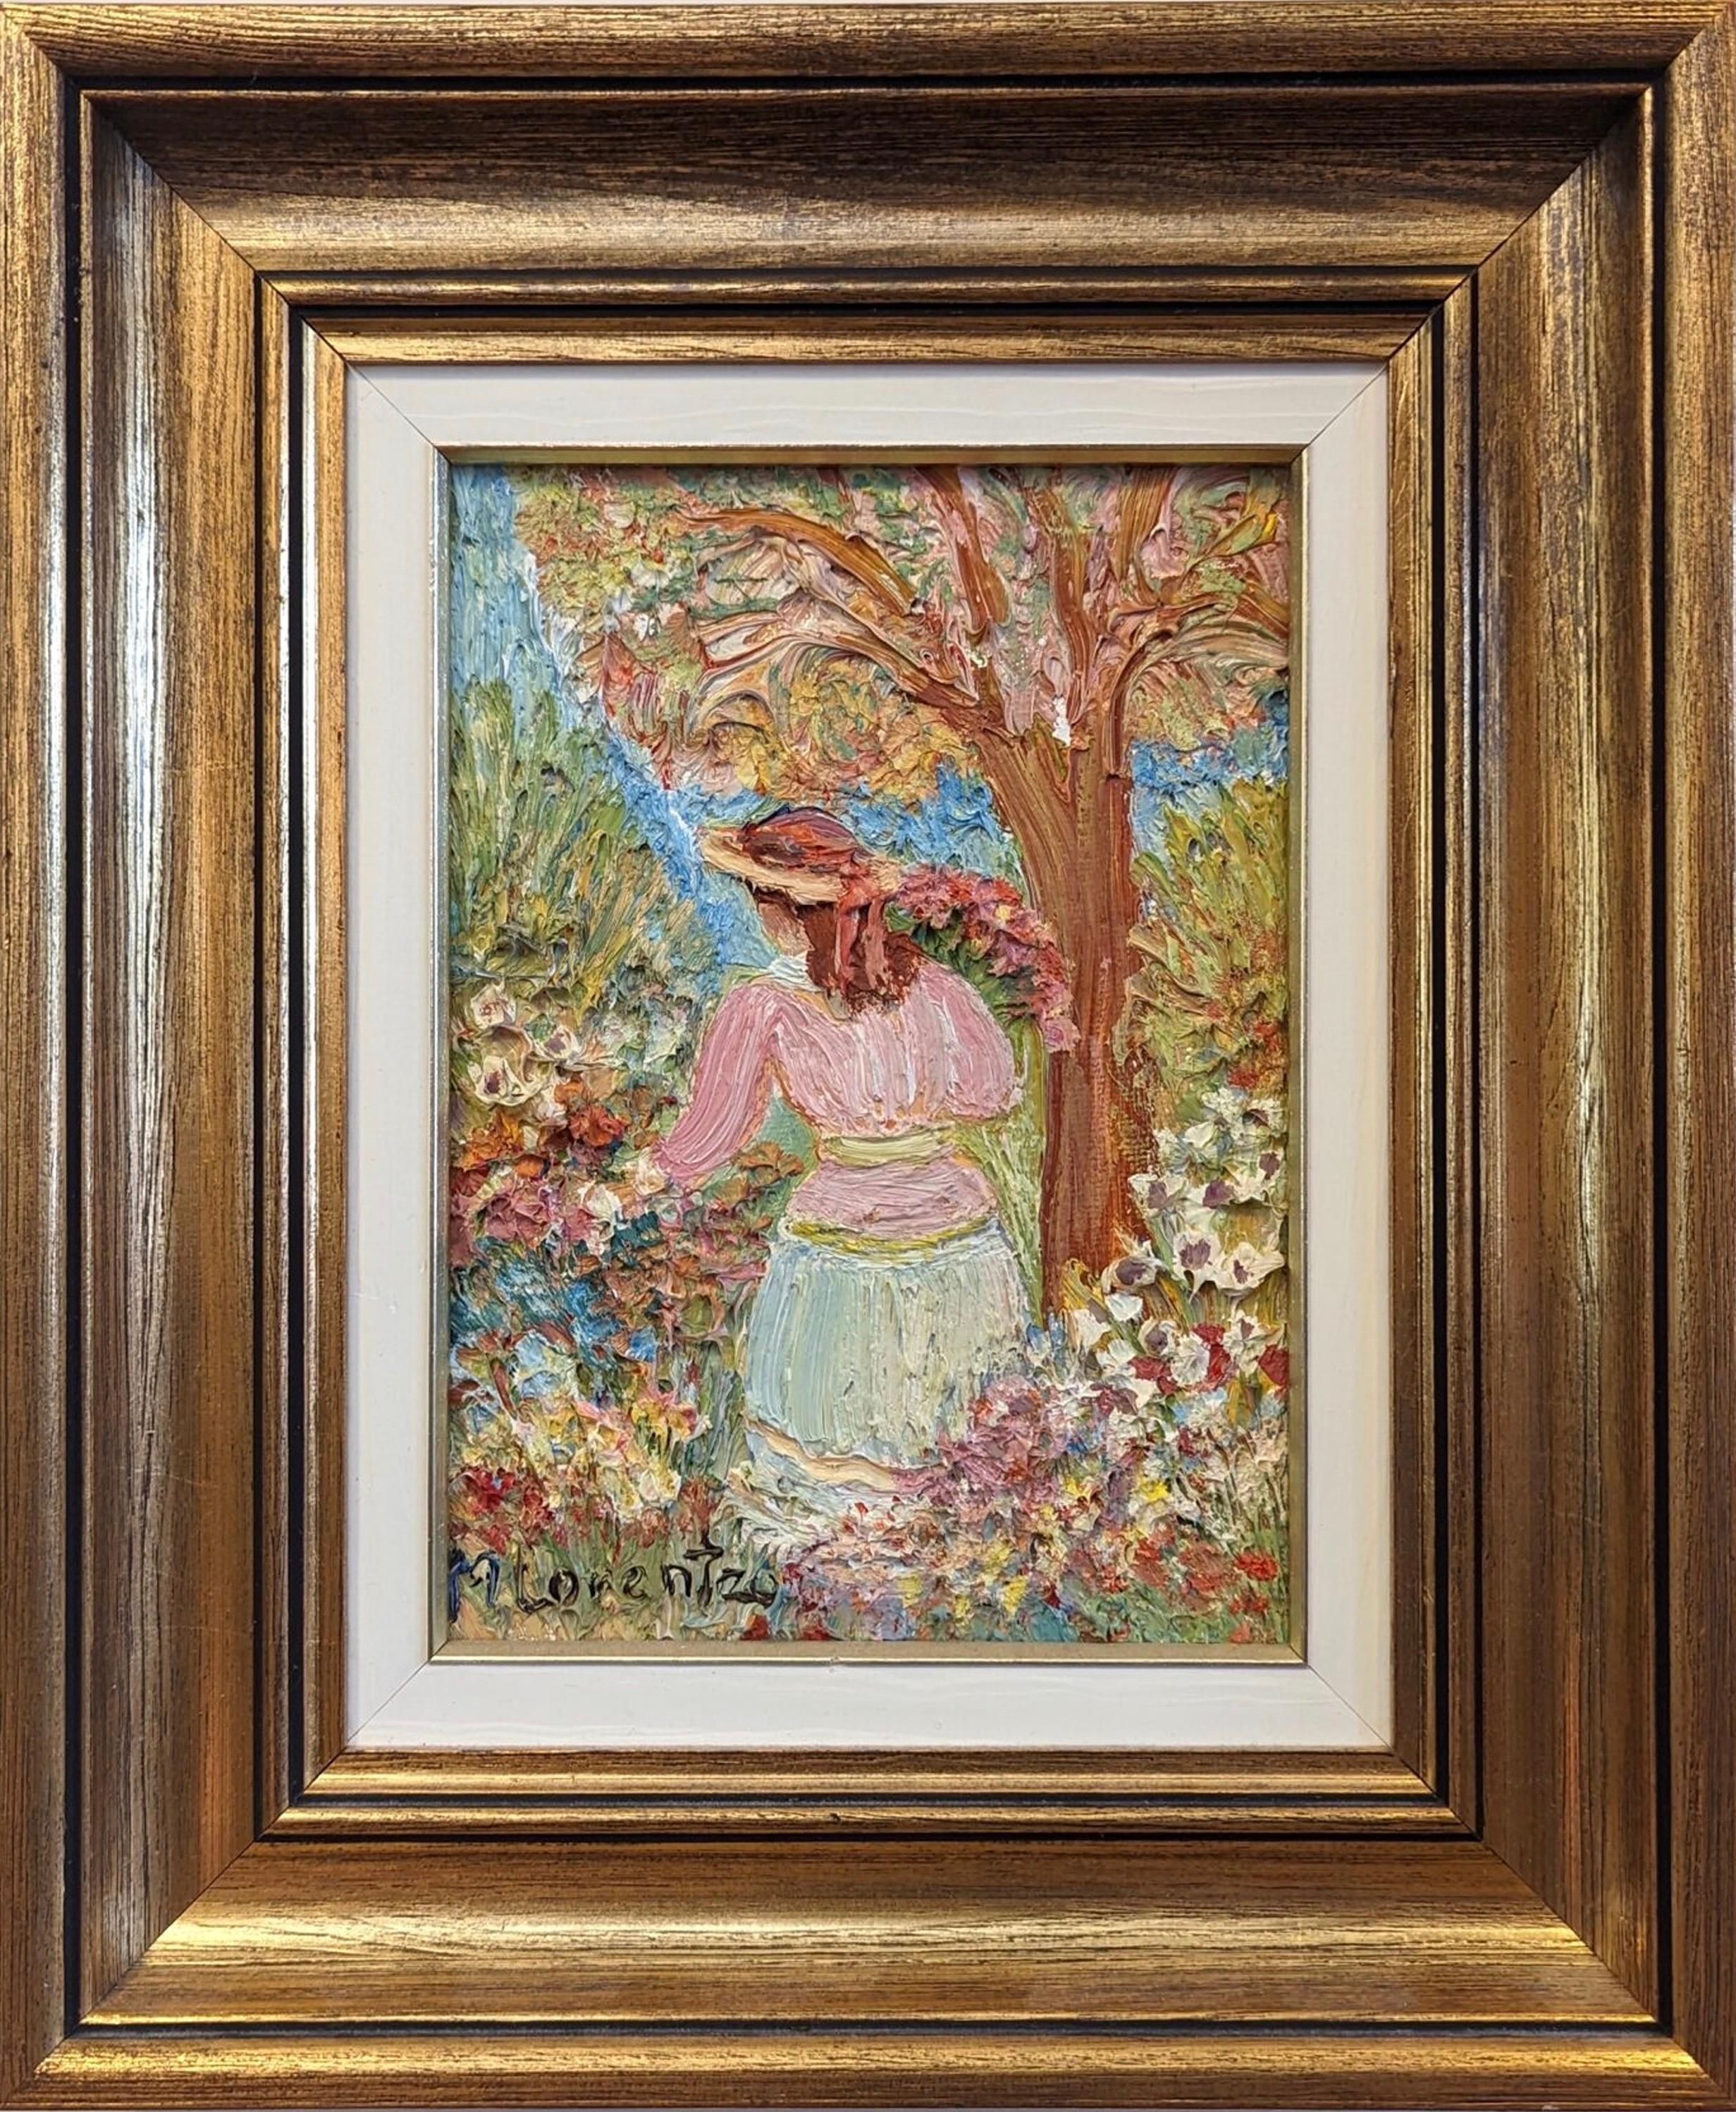 Unknown Figurative Painting - Vintage Mid-Century Swedish Figurative Framed Oil Painting - Girl in the Garden